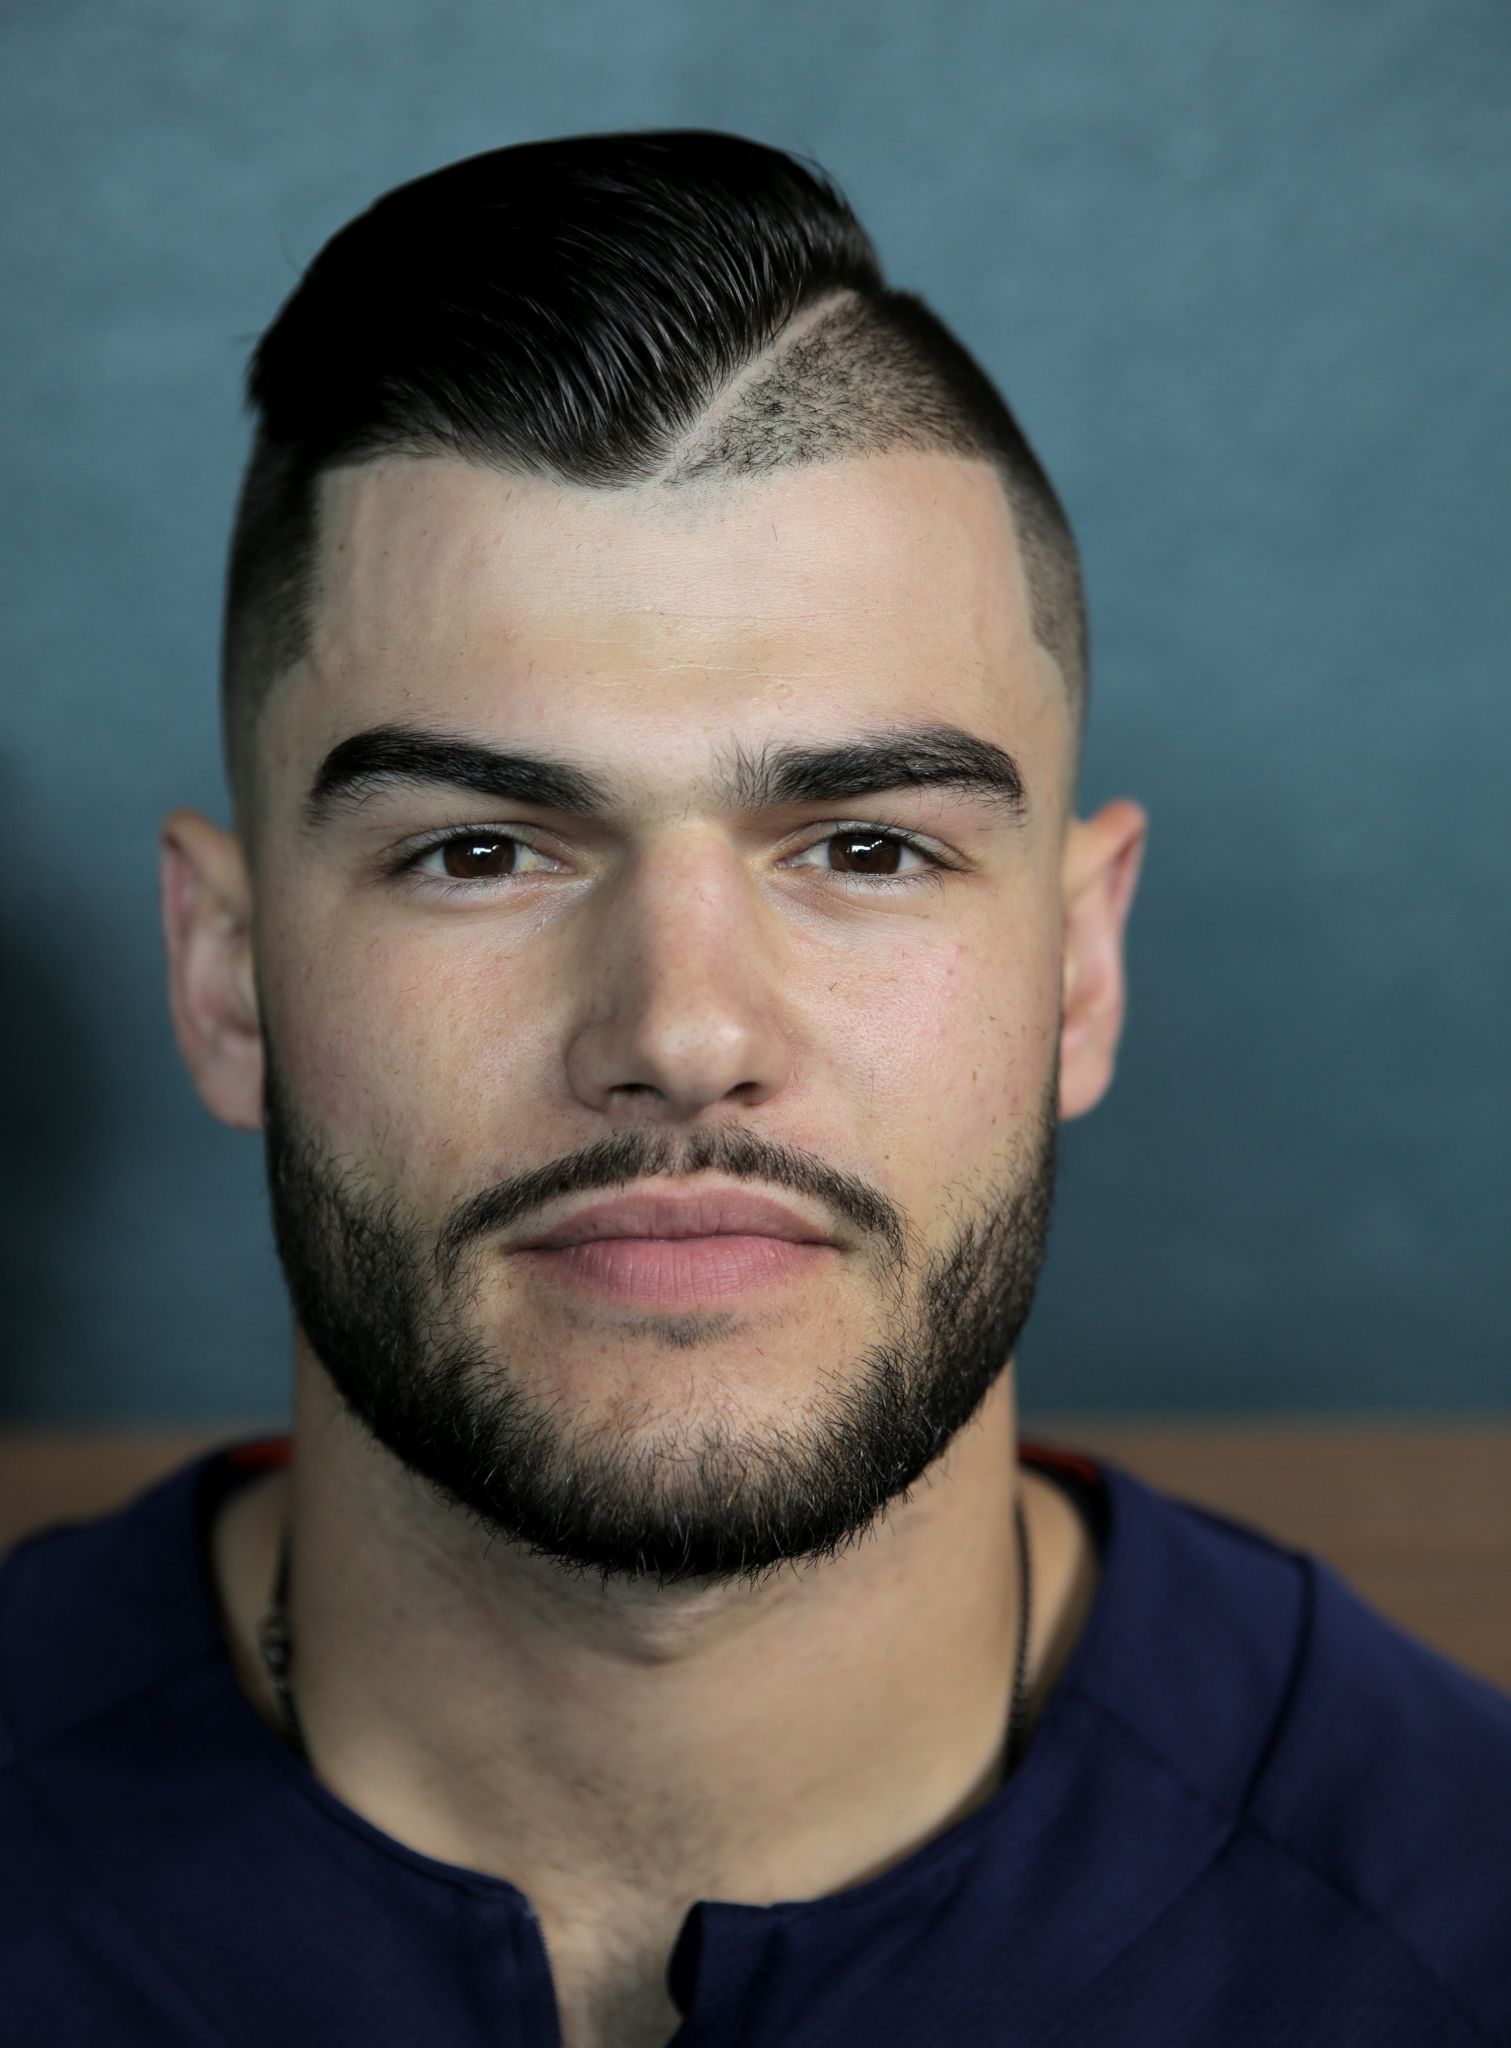 Local stylist critiques Astros' hairstyles